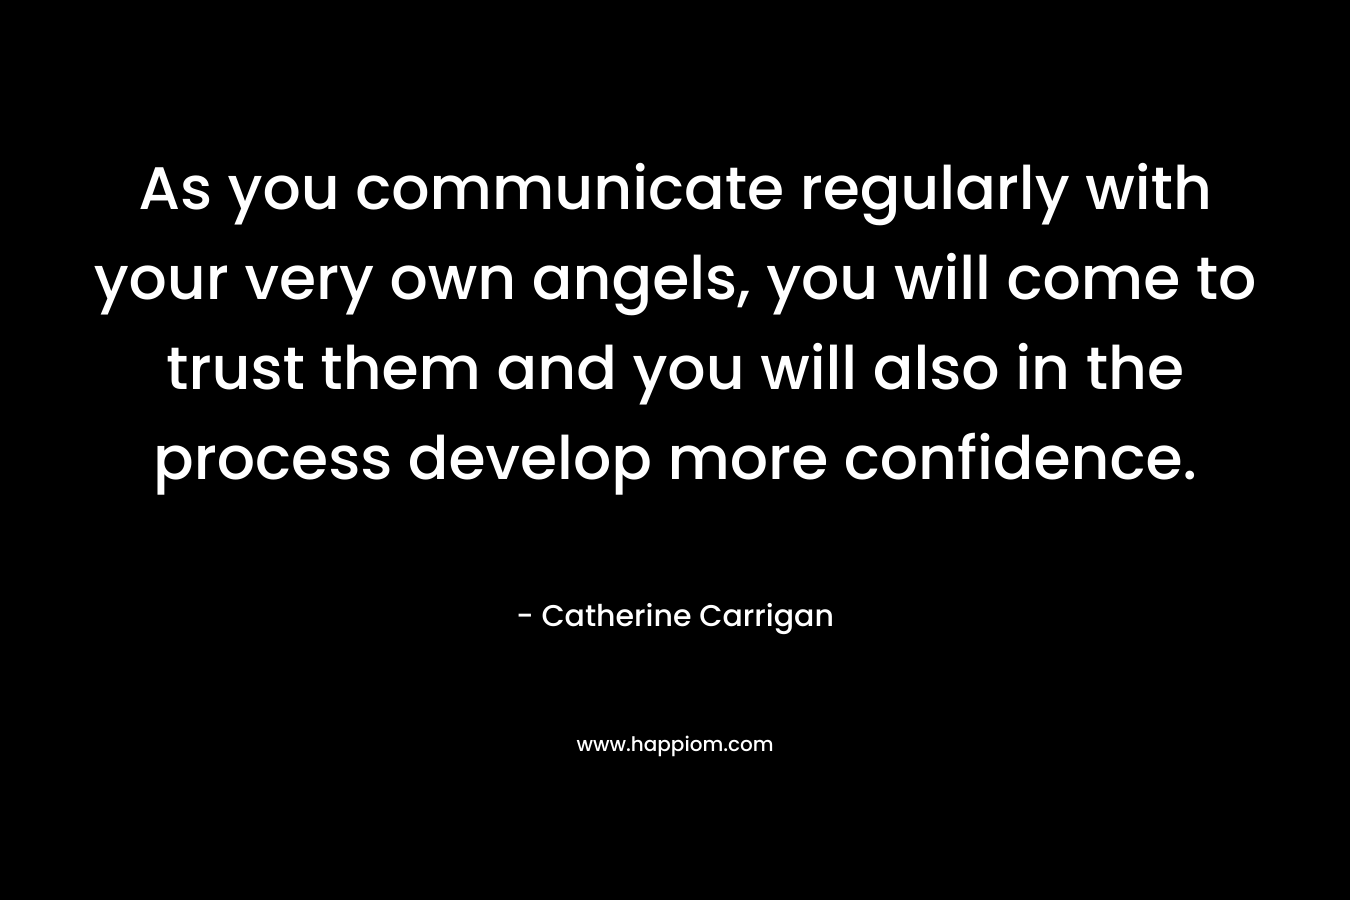 As you communicate regularly with your very own angels, you will come to trust them and you will also in the process develop more confidence. – Catherine Carrigan